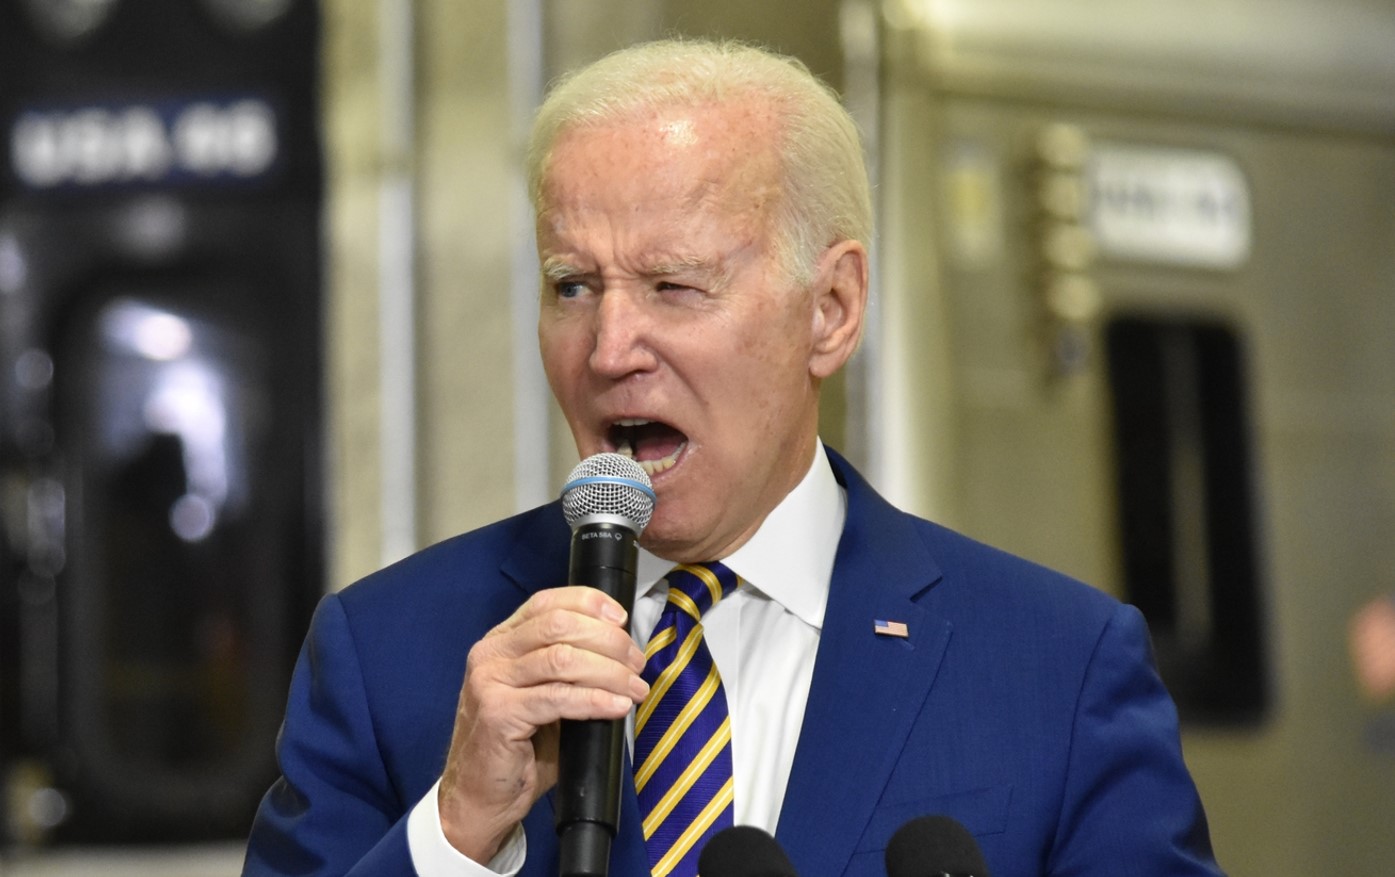 Check Out The Top U.S. Cities And Towns Where Biden Is Sending Hundreds Of Thousands Of Paroled Migrants – Is YOURS On The List?